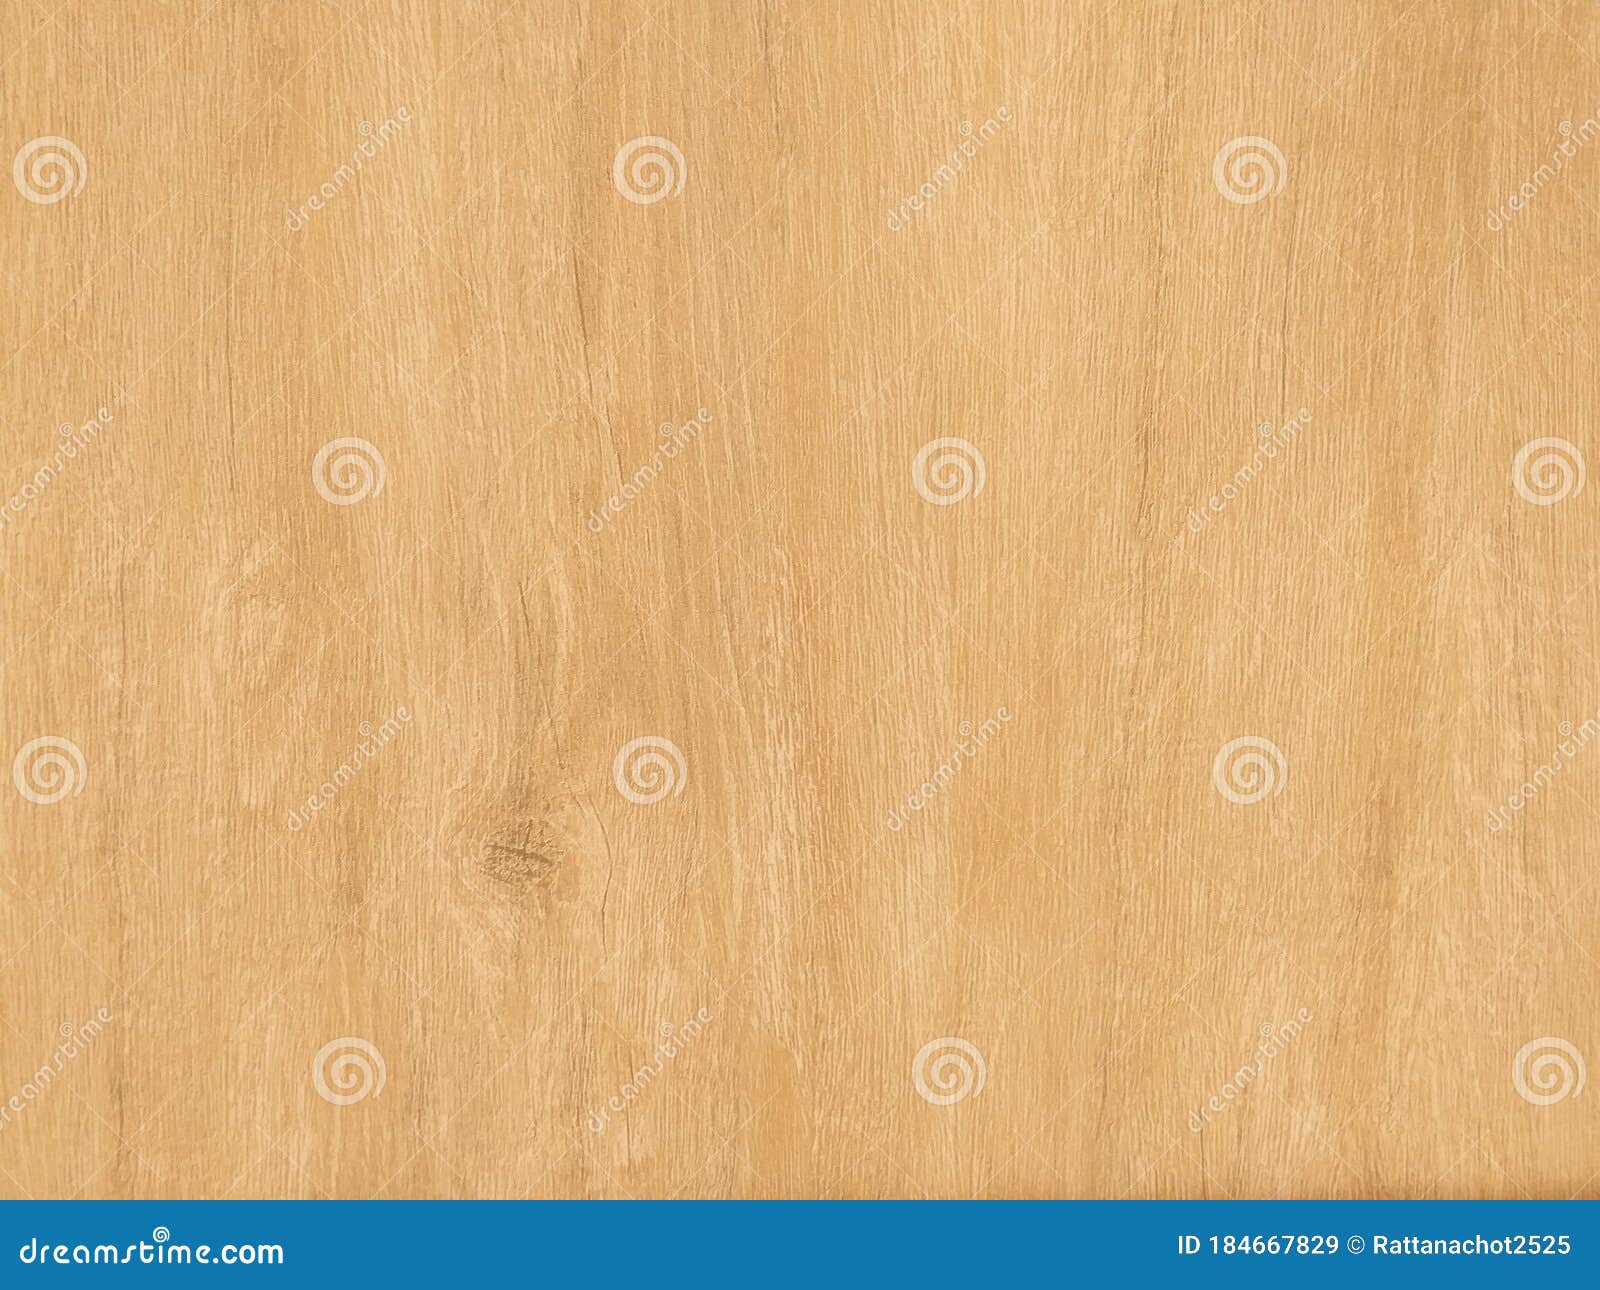 soft wood surface as background.wood texture. floor wood table pattern top view.